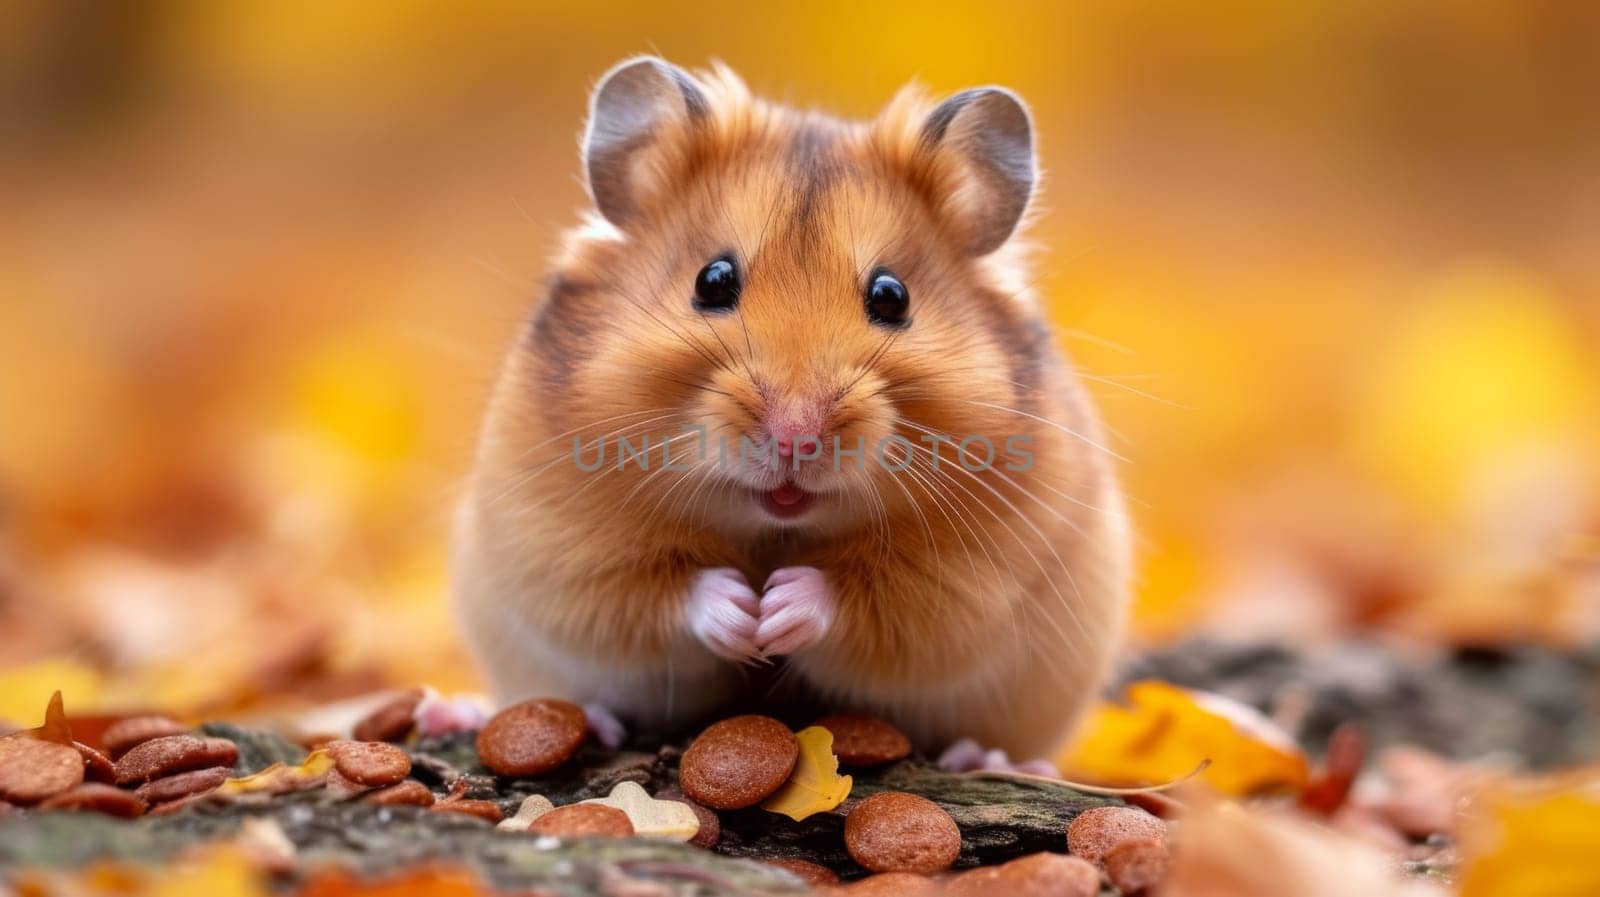 A small brown and white hamster sitting on a pile of leaves, AI by starush